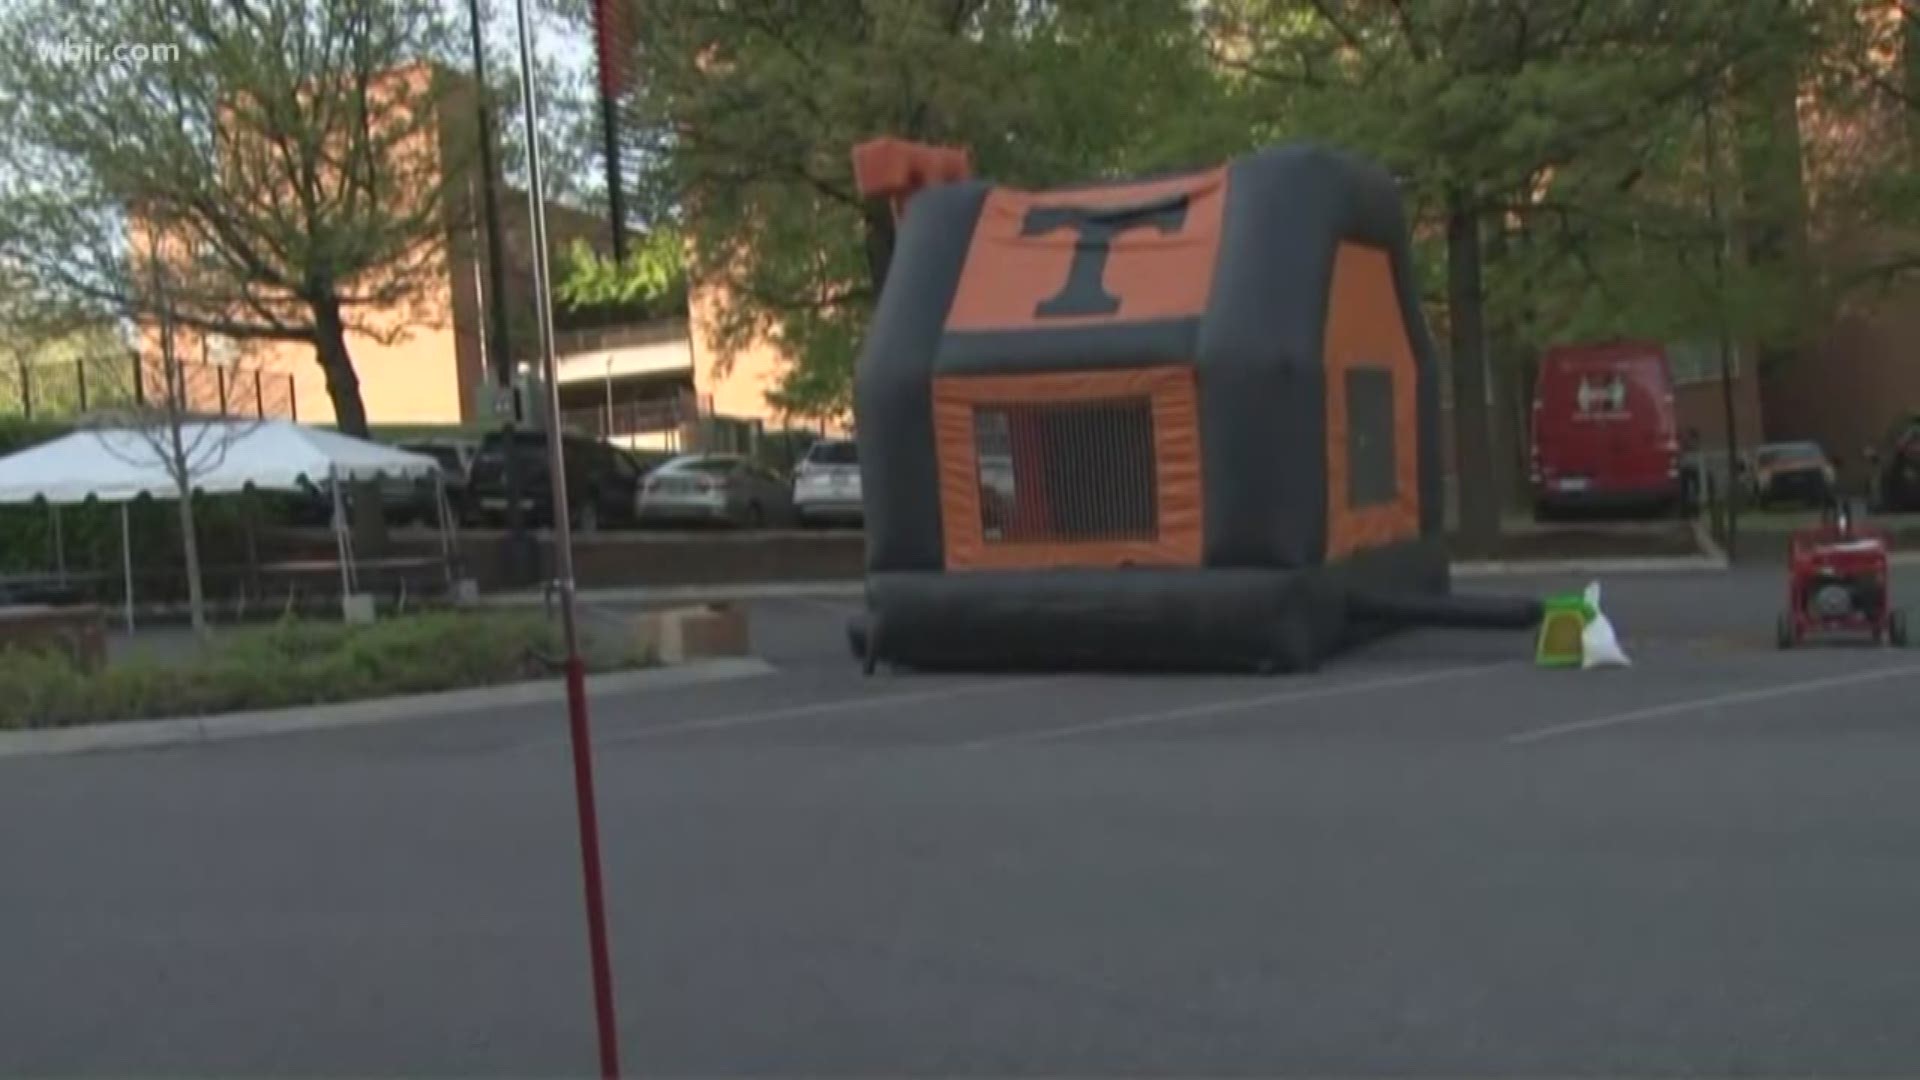 The University of Tennessee prepares for the Orange and White game Saturday.